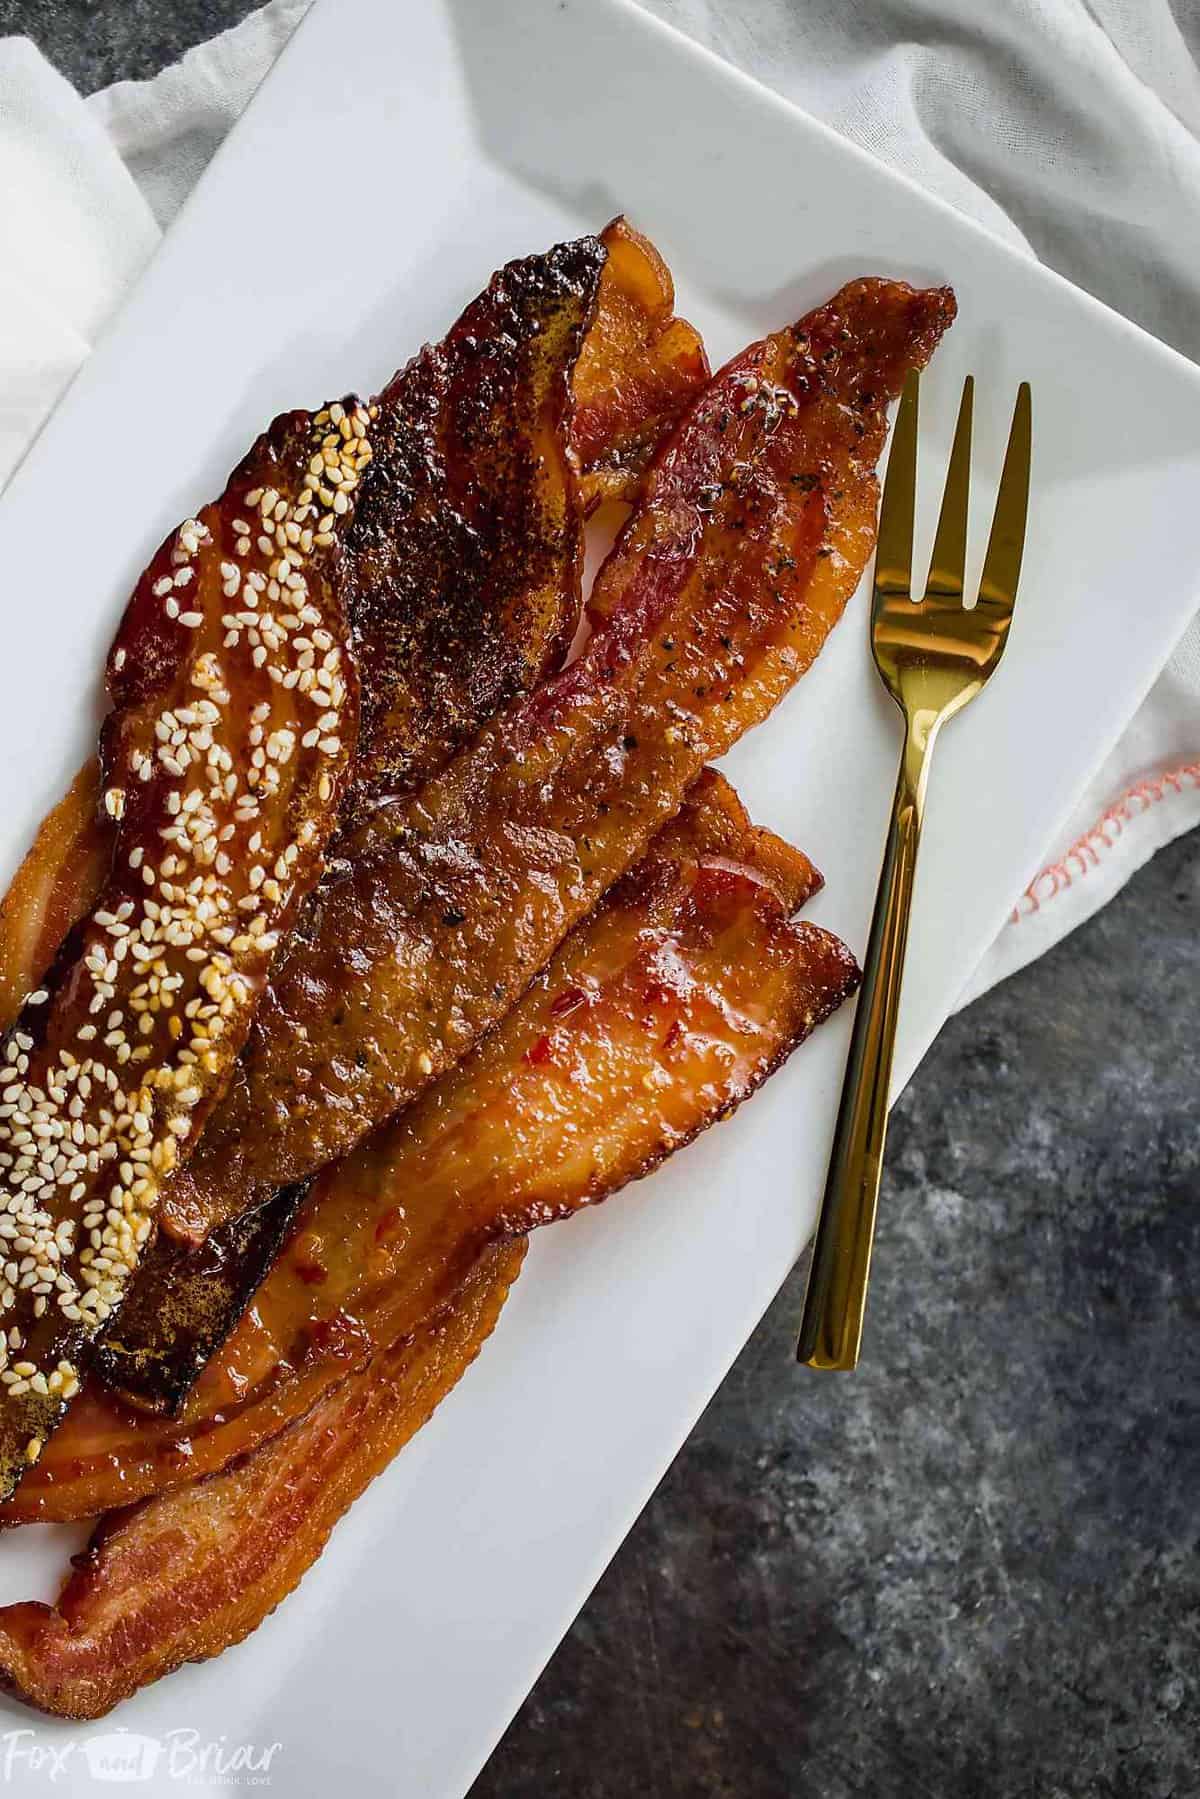 https://www.foxandbriar.com/wp-content/uploads/2018/02/How-to-make-the-best-bacon-Fox-and-Briar-10.jpg